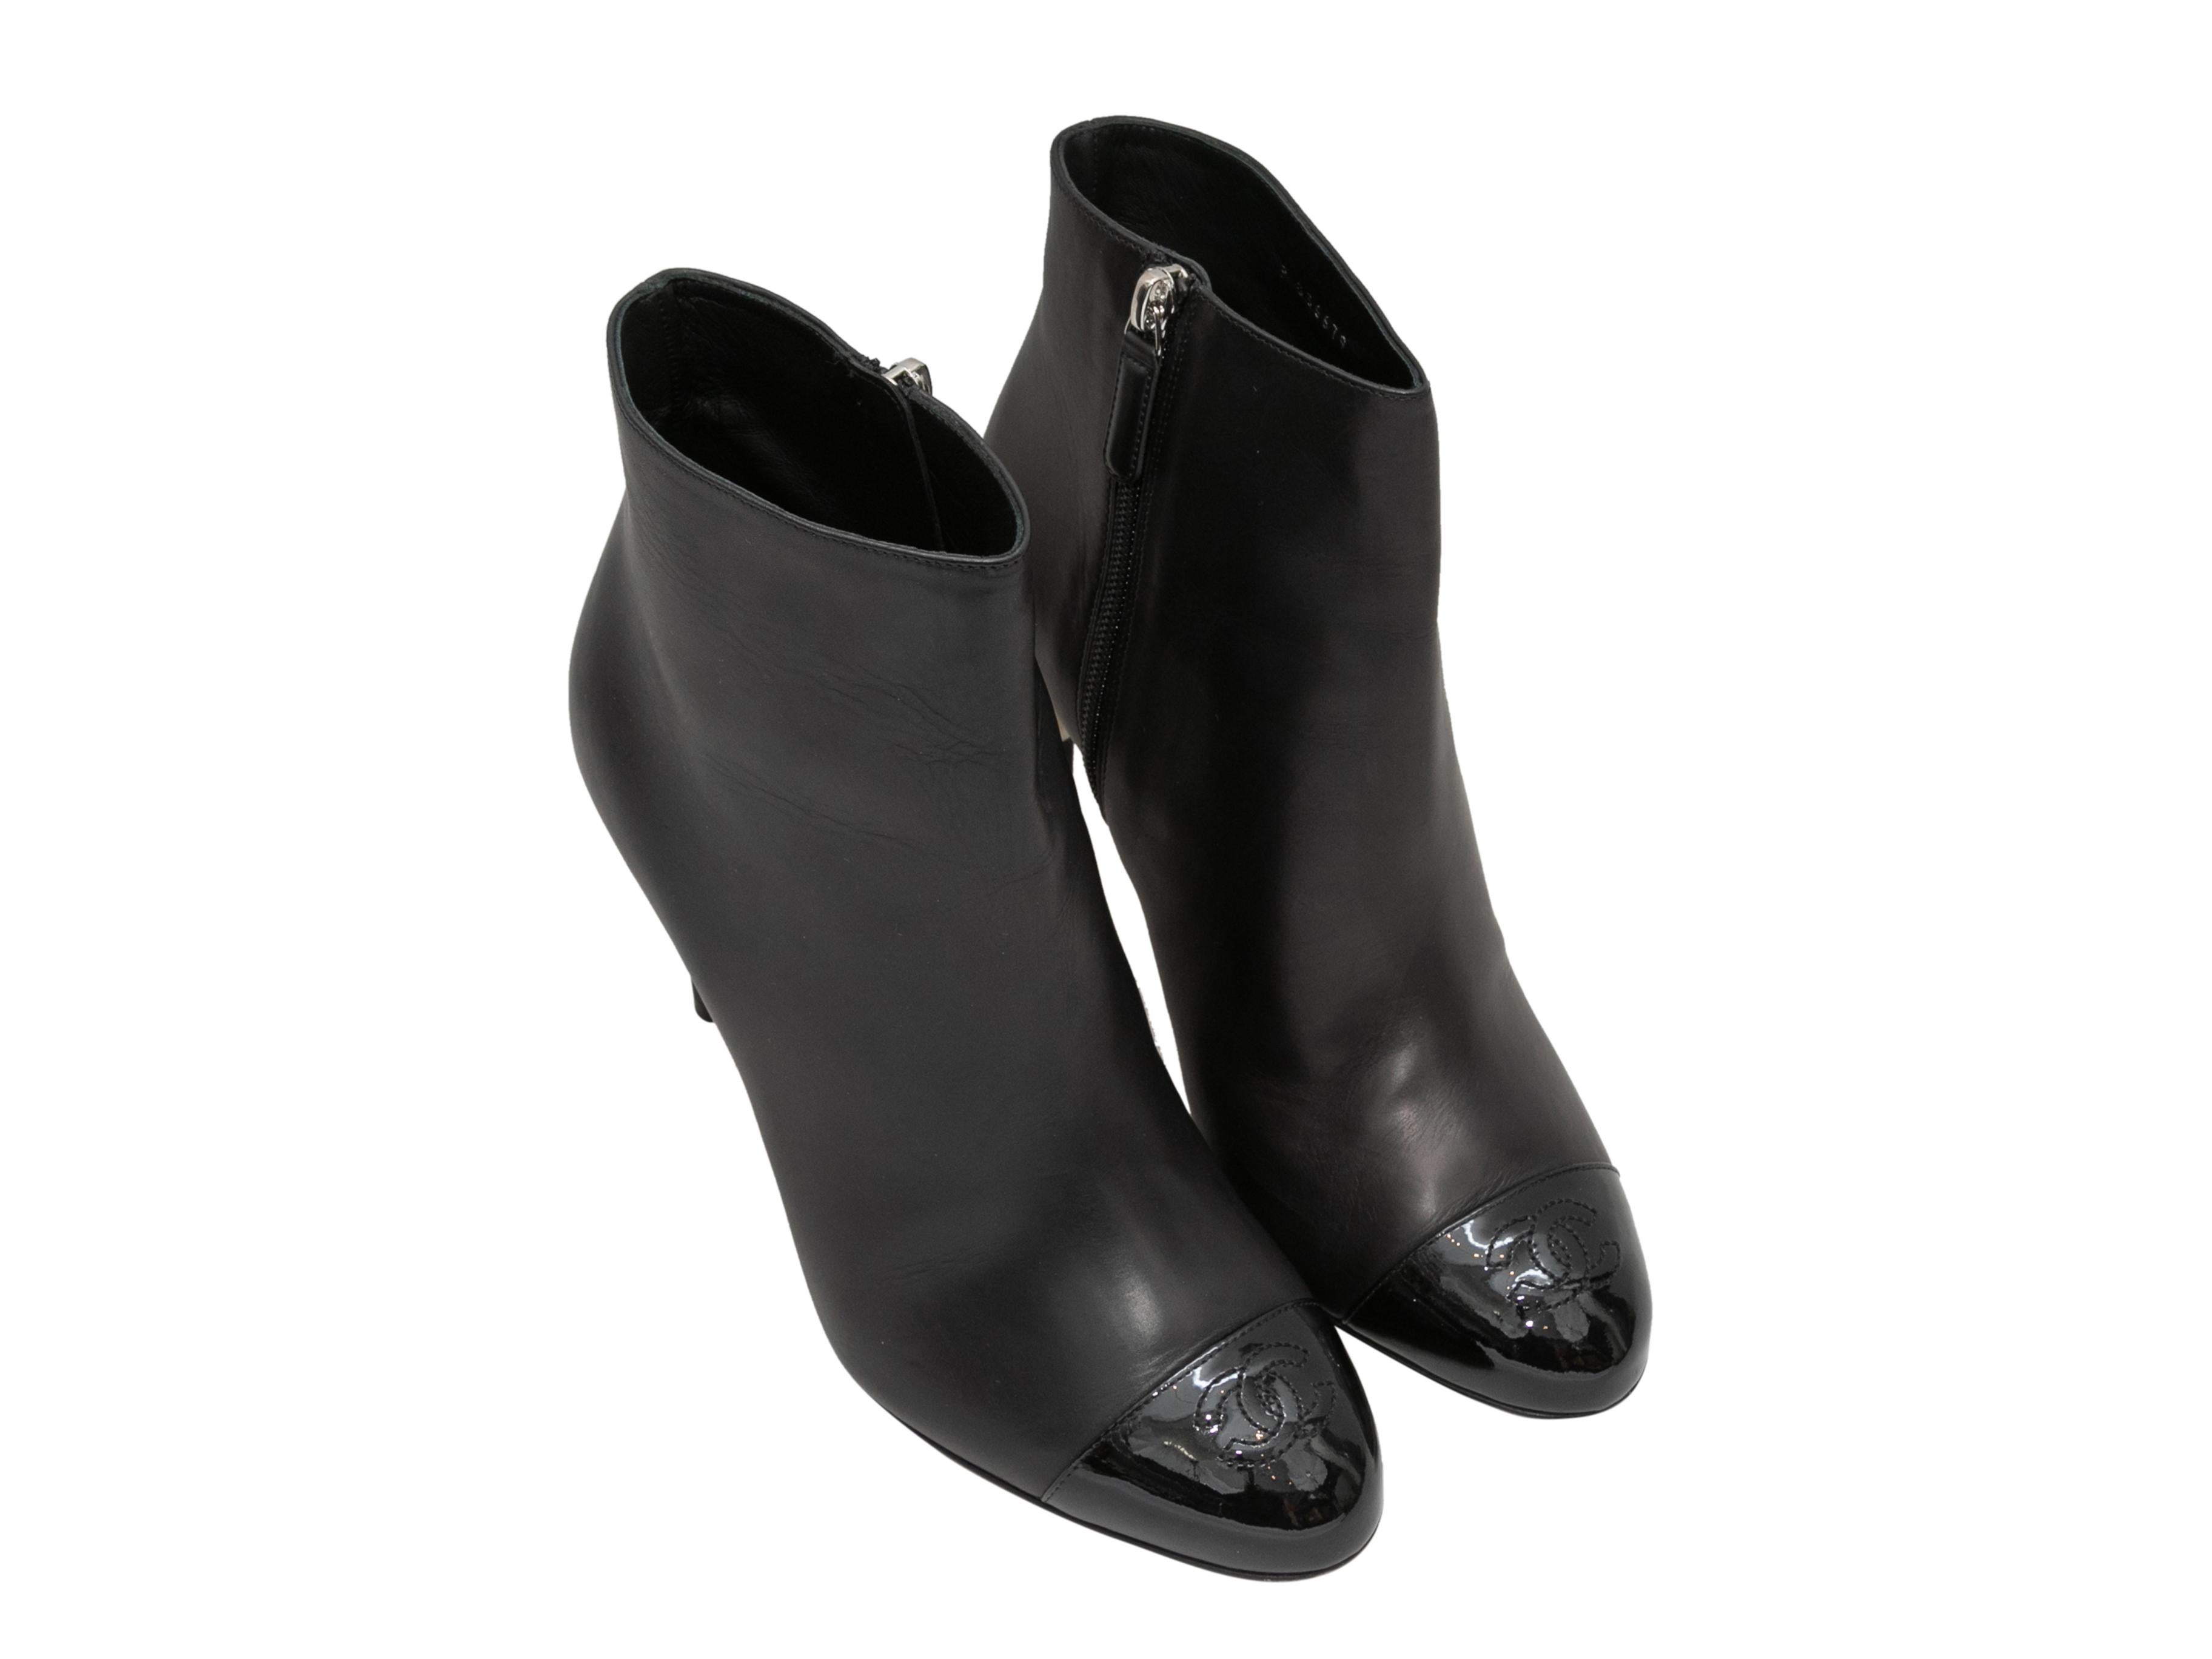 Black leather cap-toe CC ankle boots by Chanel. Faux pearl accents at heels. Zip closures at inner sides. 4.25